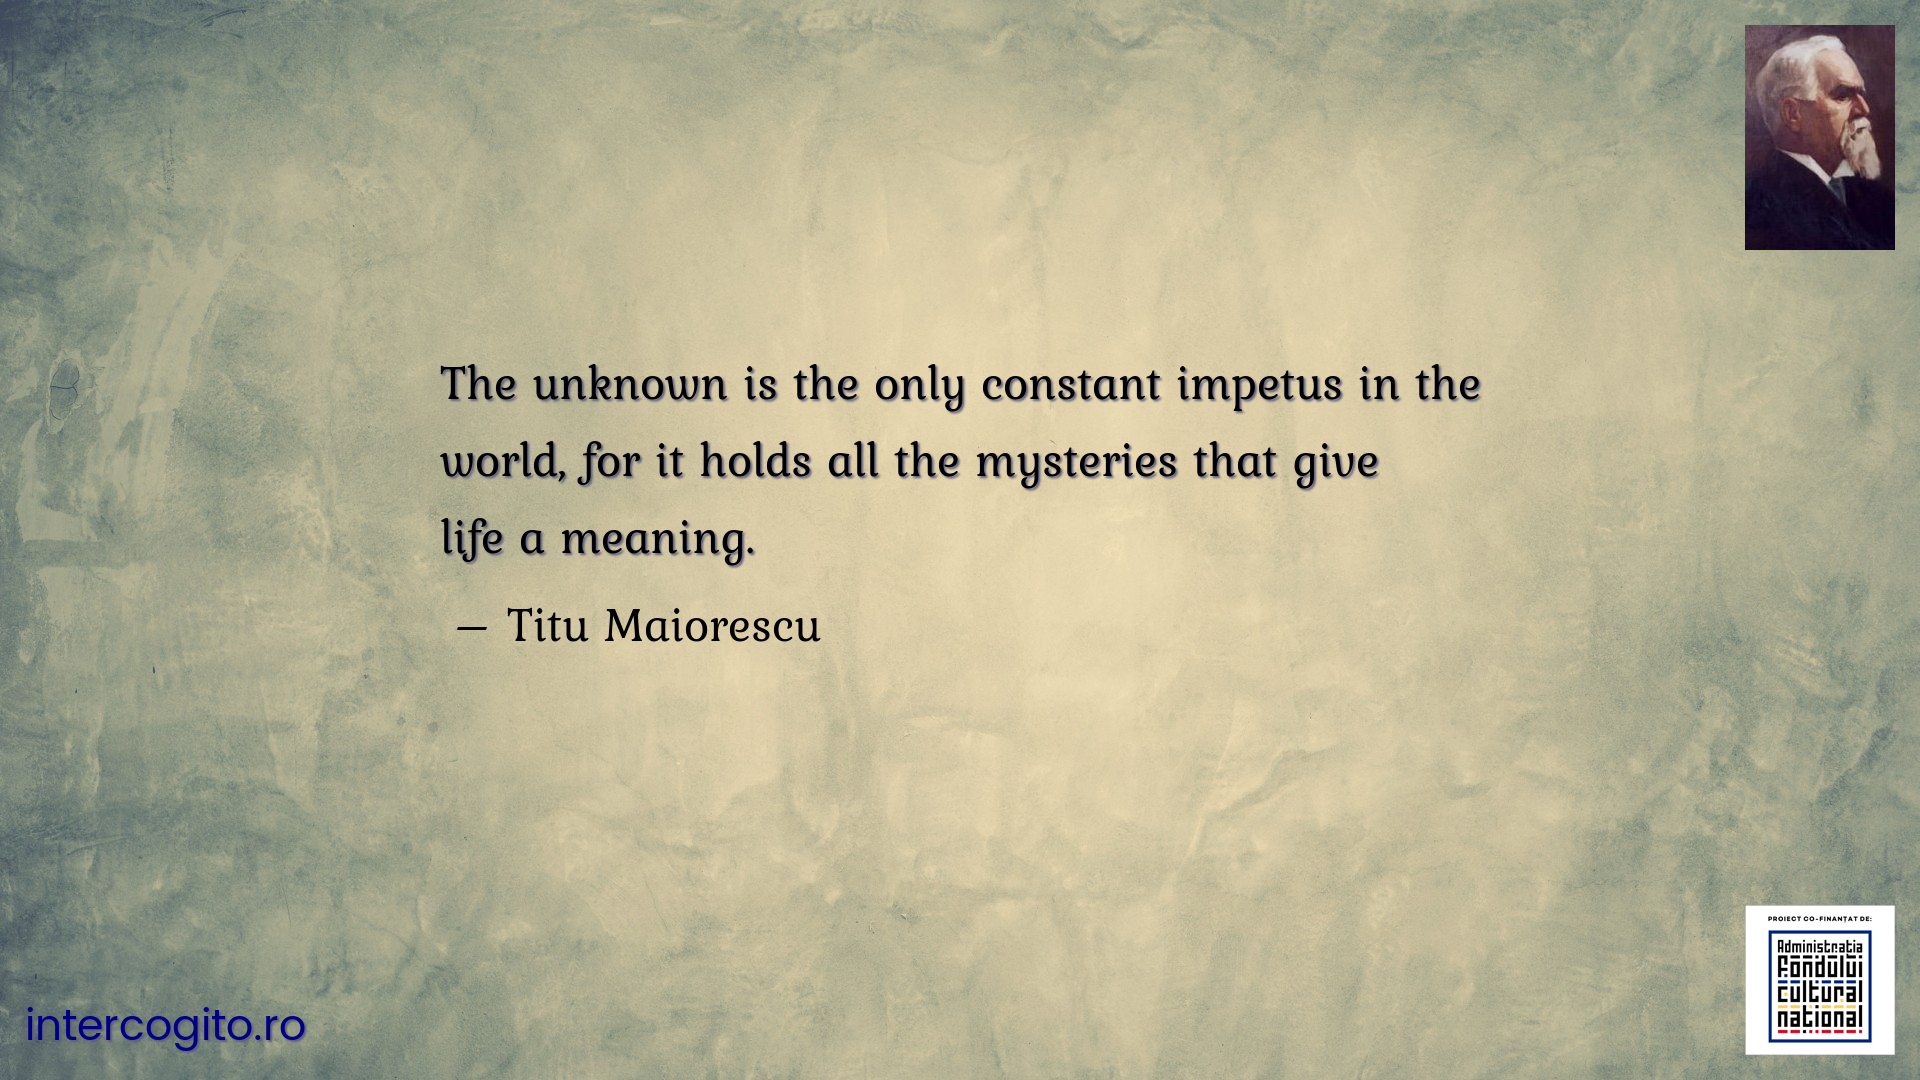 The unknown is the only constant impetus in the world, for it holds all the mysteries that give life a meaning.